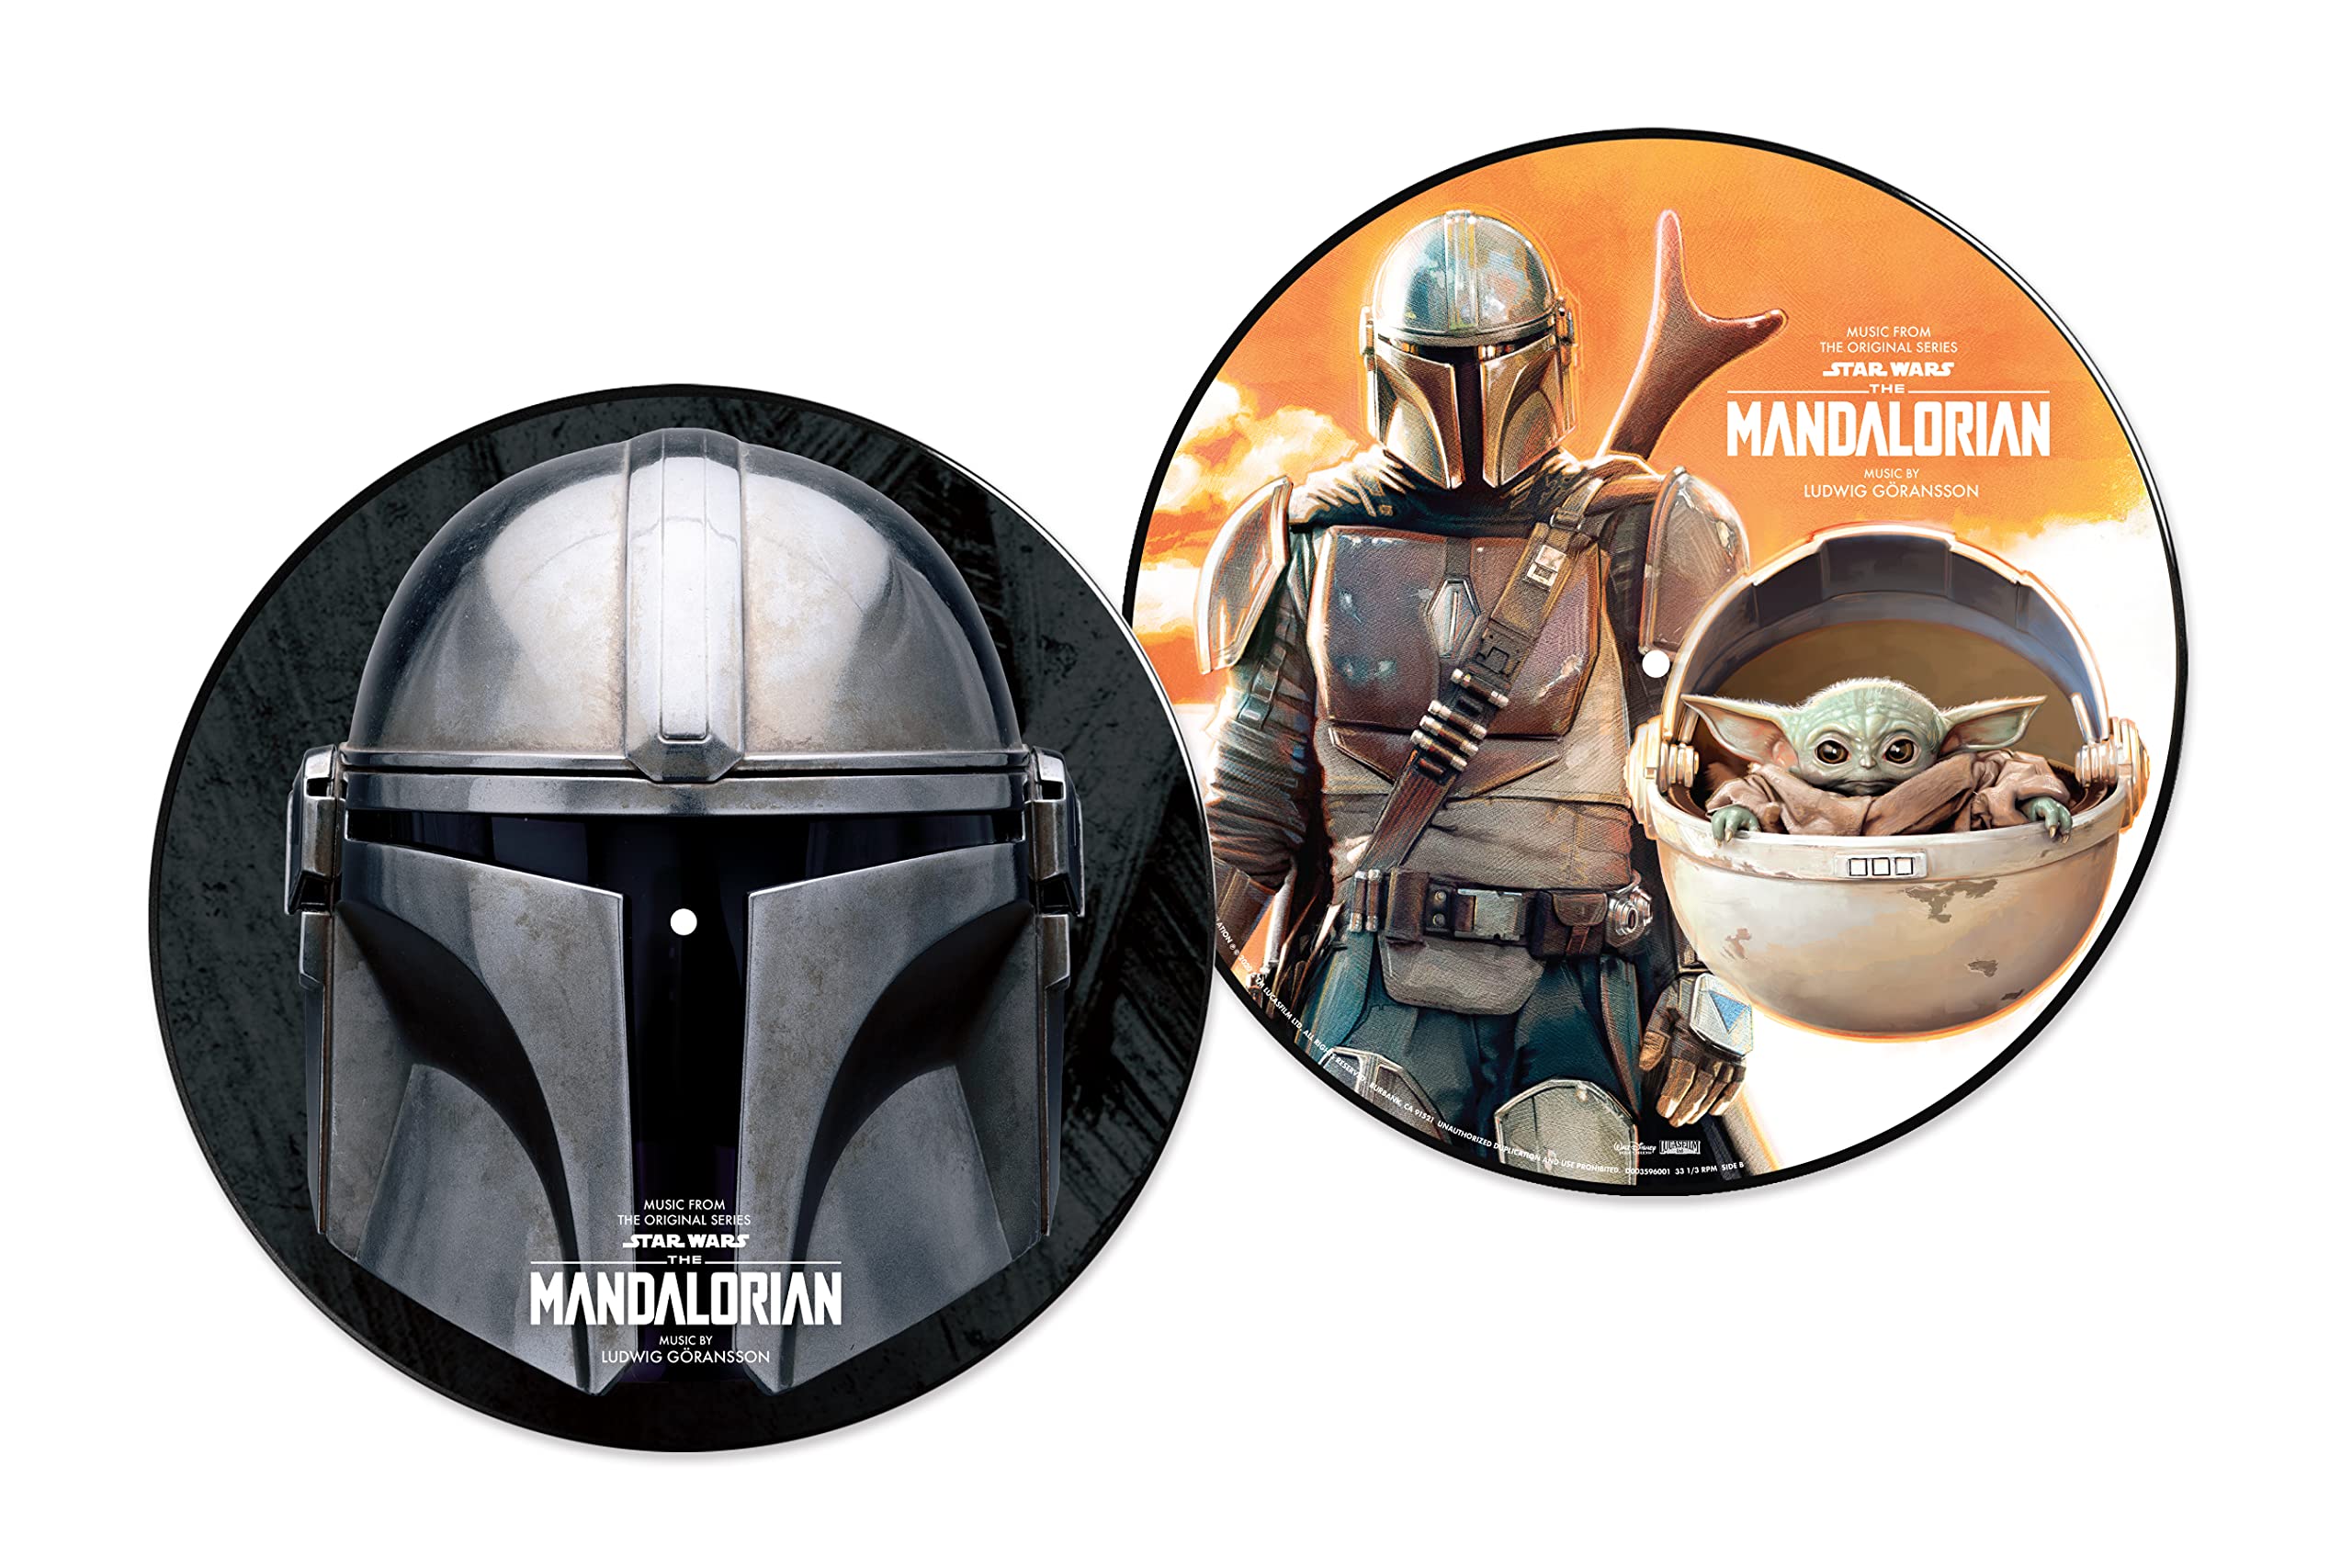 The Mandalorian [Music from the Original Series] [Picture Disc] on MovieShack